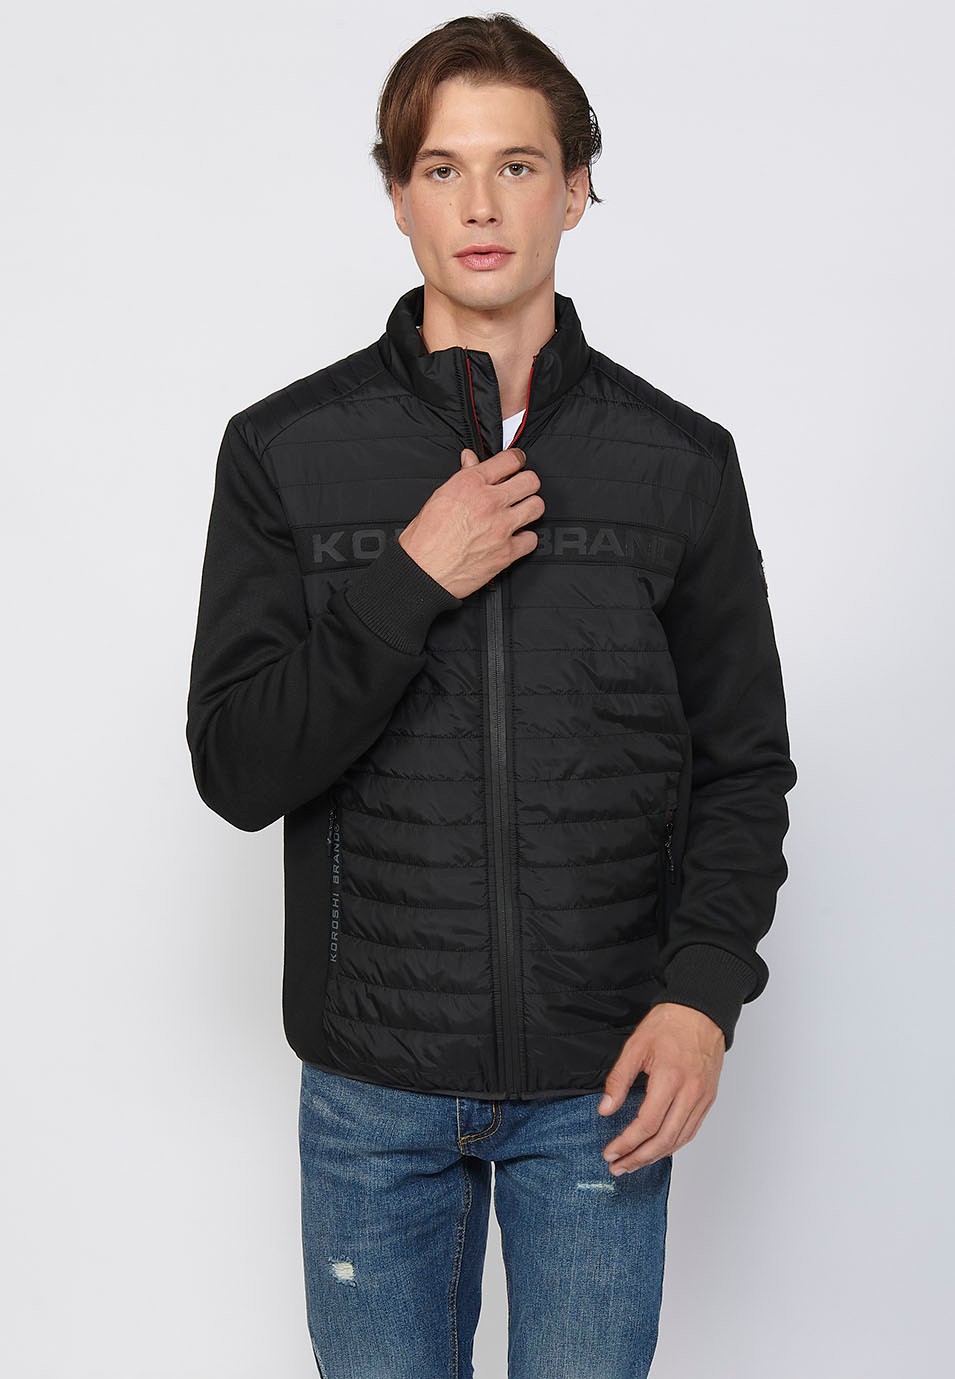 Long-sleeved Jacket with Round Neck and Front Zipper Closure with Front Details in Black for Men